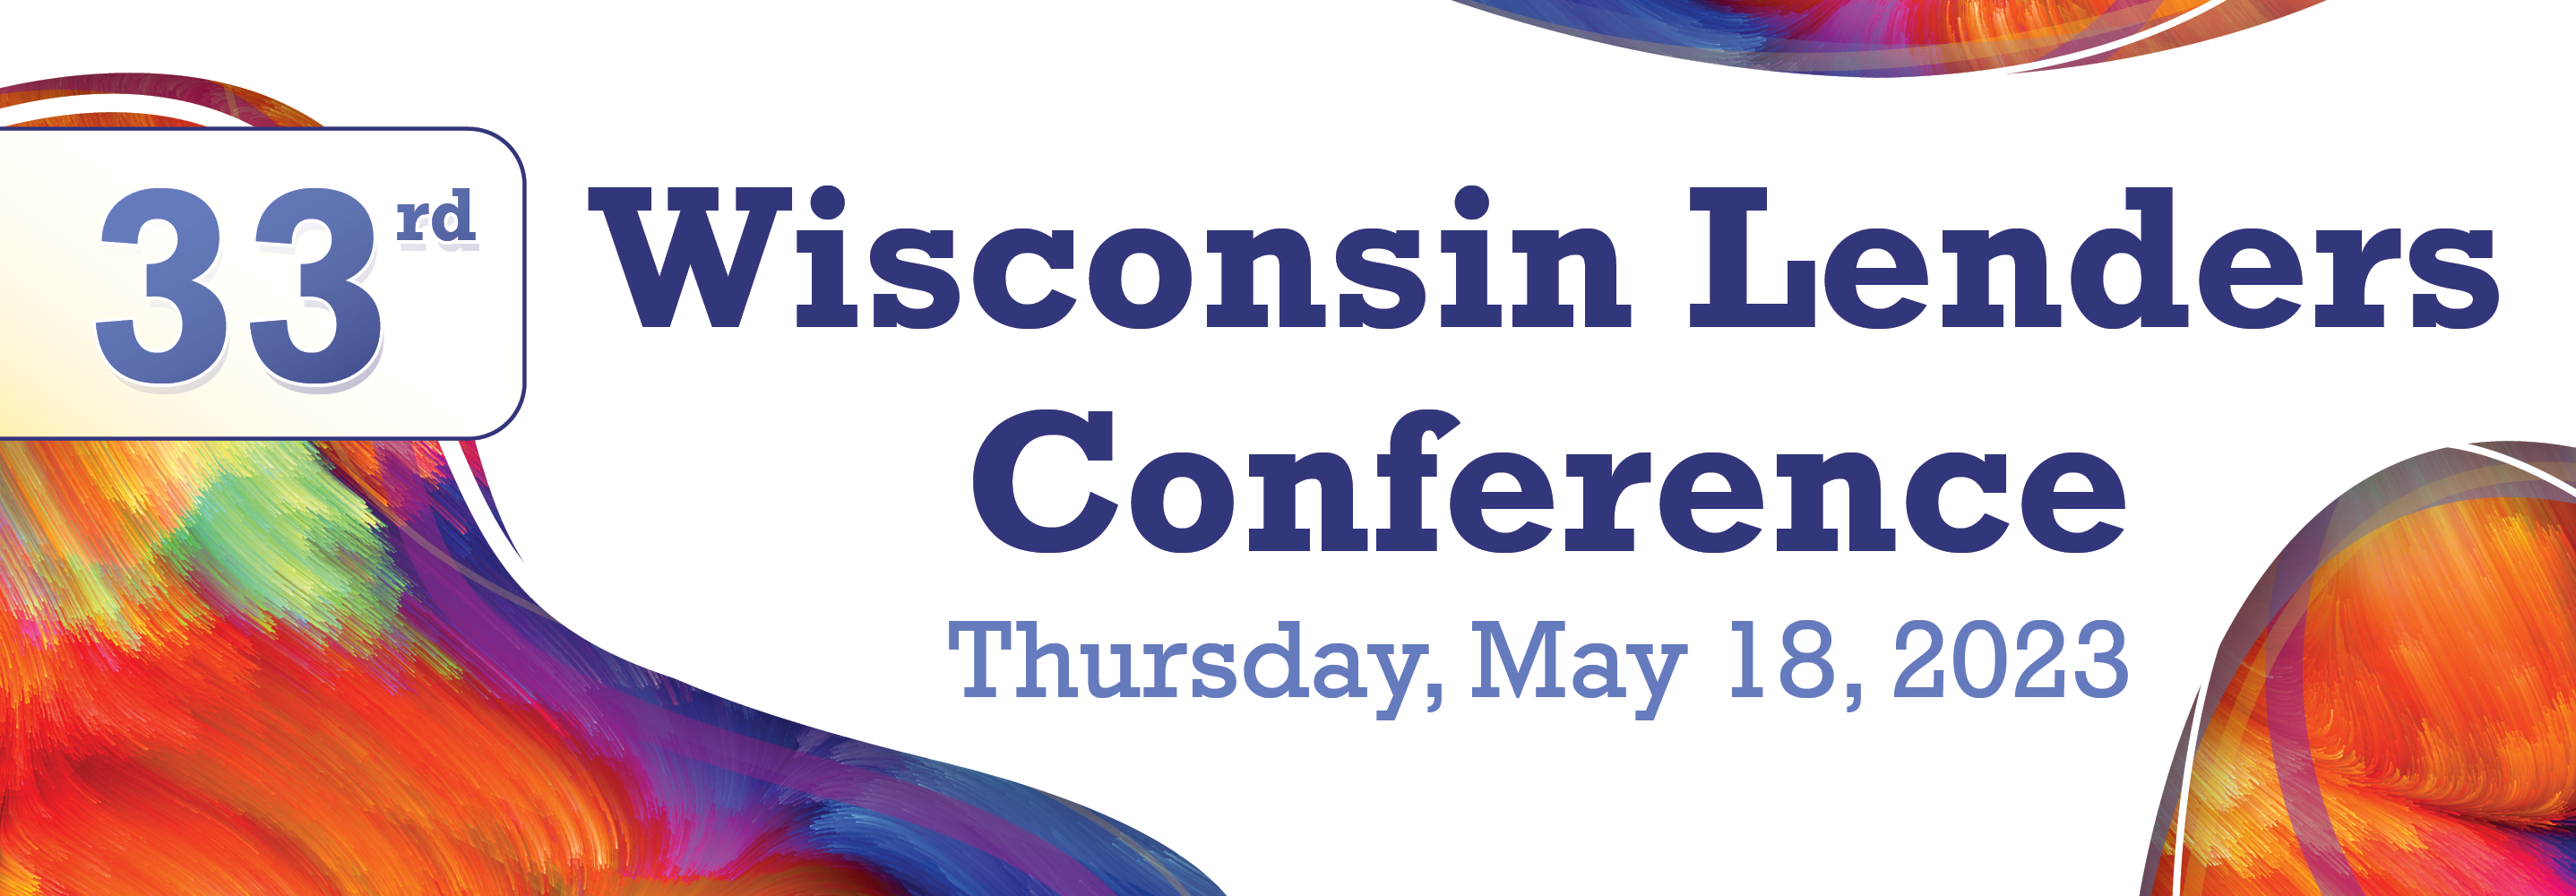 Wisconsin Lenders Conference  header image with sponsor logos